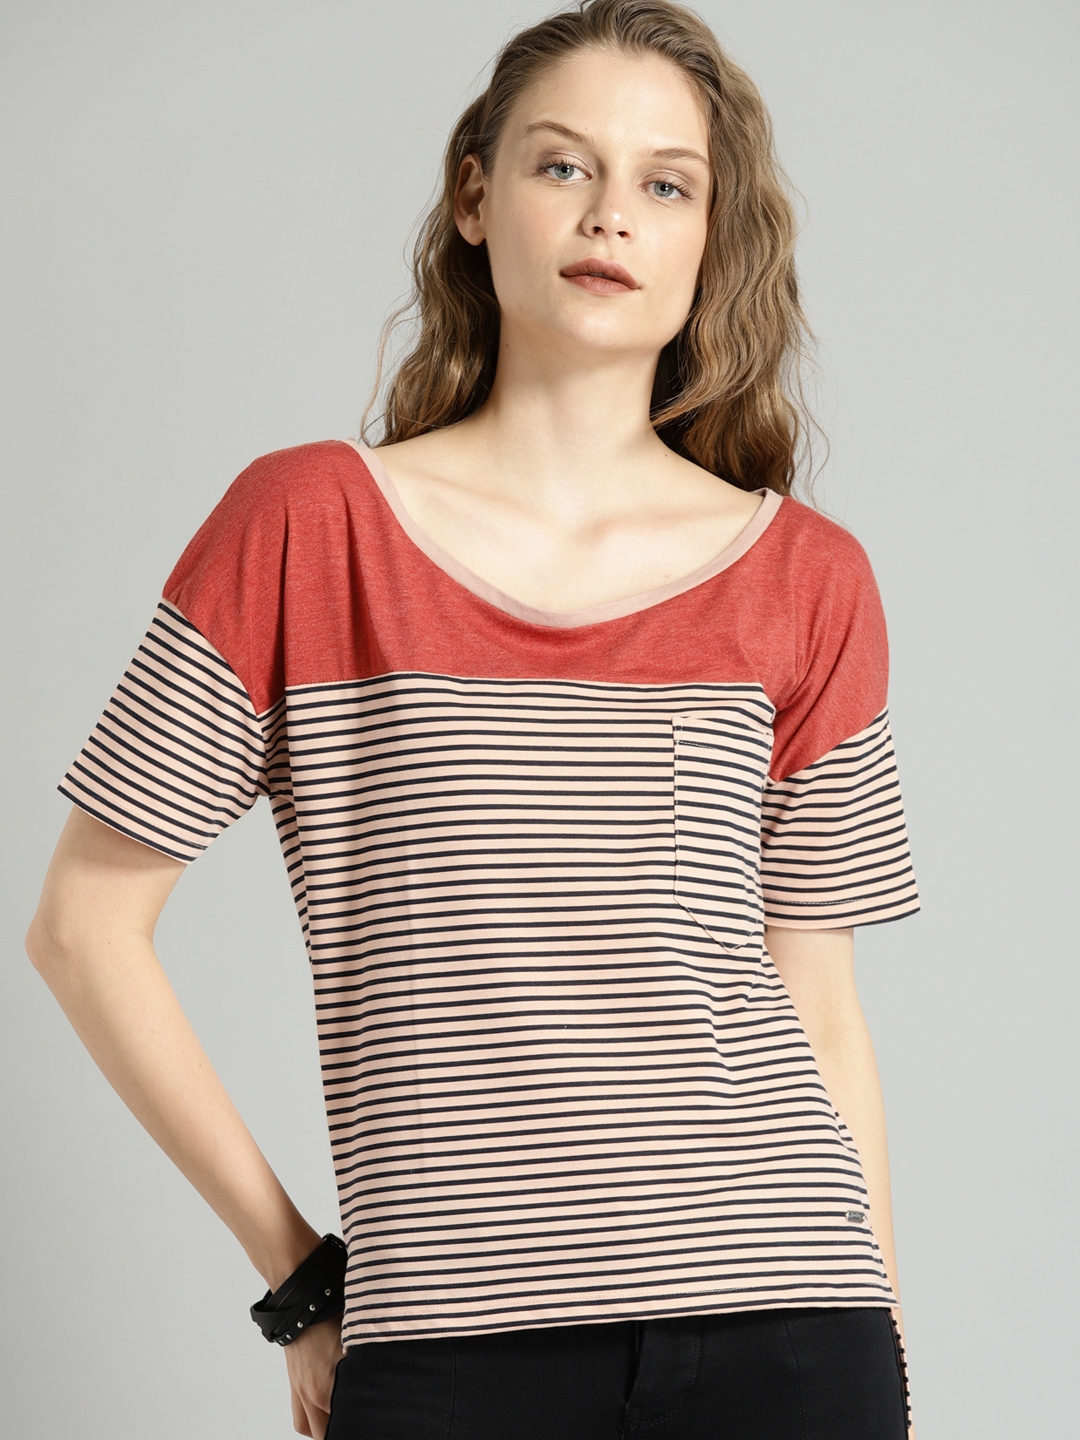 Download Buy Roadster Women Pink & White Striped Round Neck T Shirt ...